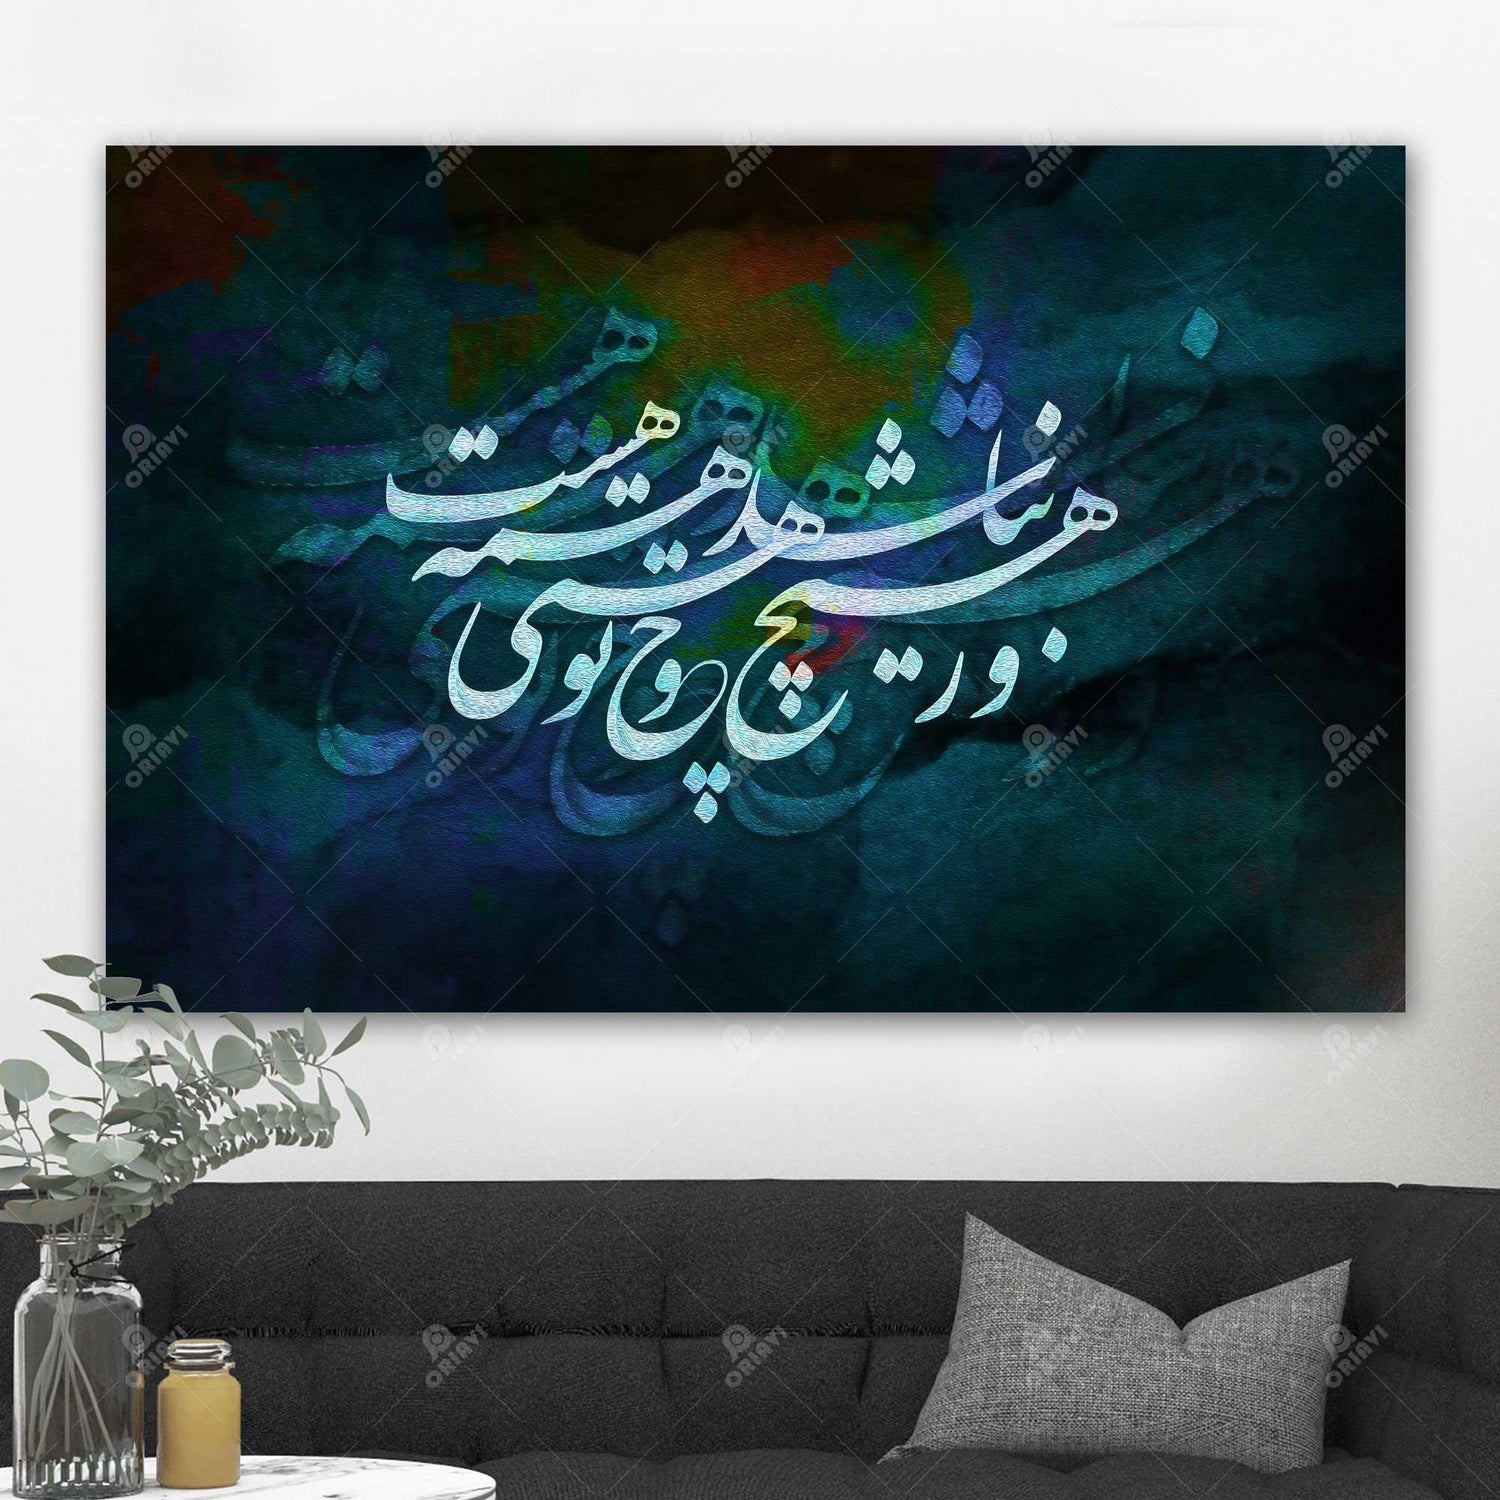 When You are with Me | Persian Wall Art | Persian Home Wall Decor - ORIAVI Persian Art, persian artwork for sale, persian calligraphy, persian calligraphy wall art, persian mix media wall art, persian painting, persian wall art